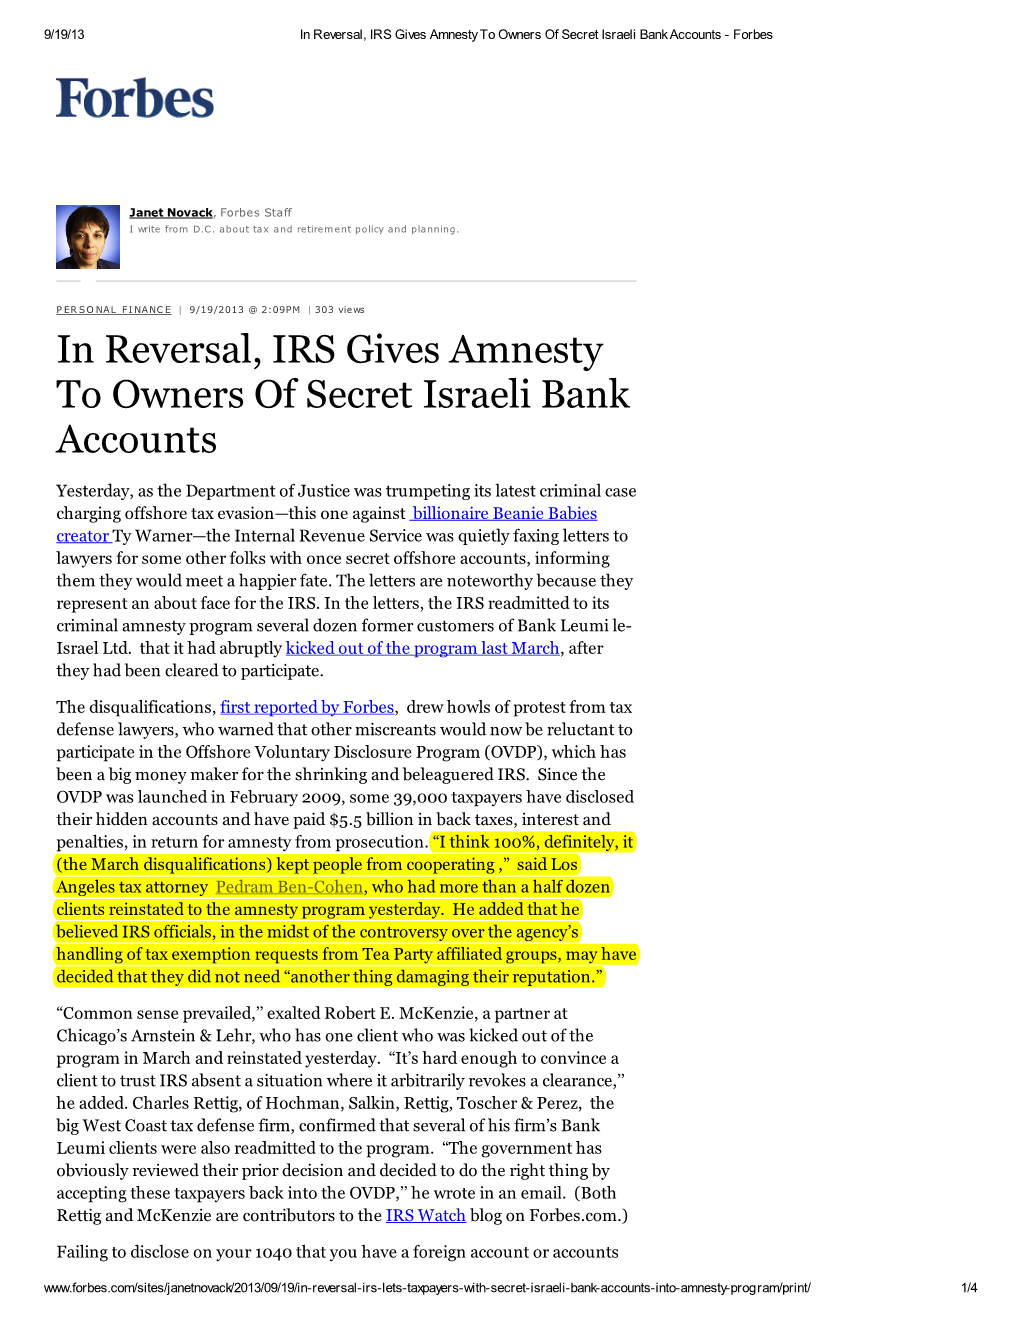 In Reversal, IRS Gives Amnesty to Owners of Secret Israeli Bank Accounts - Forbes